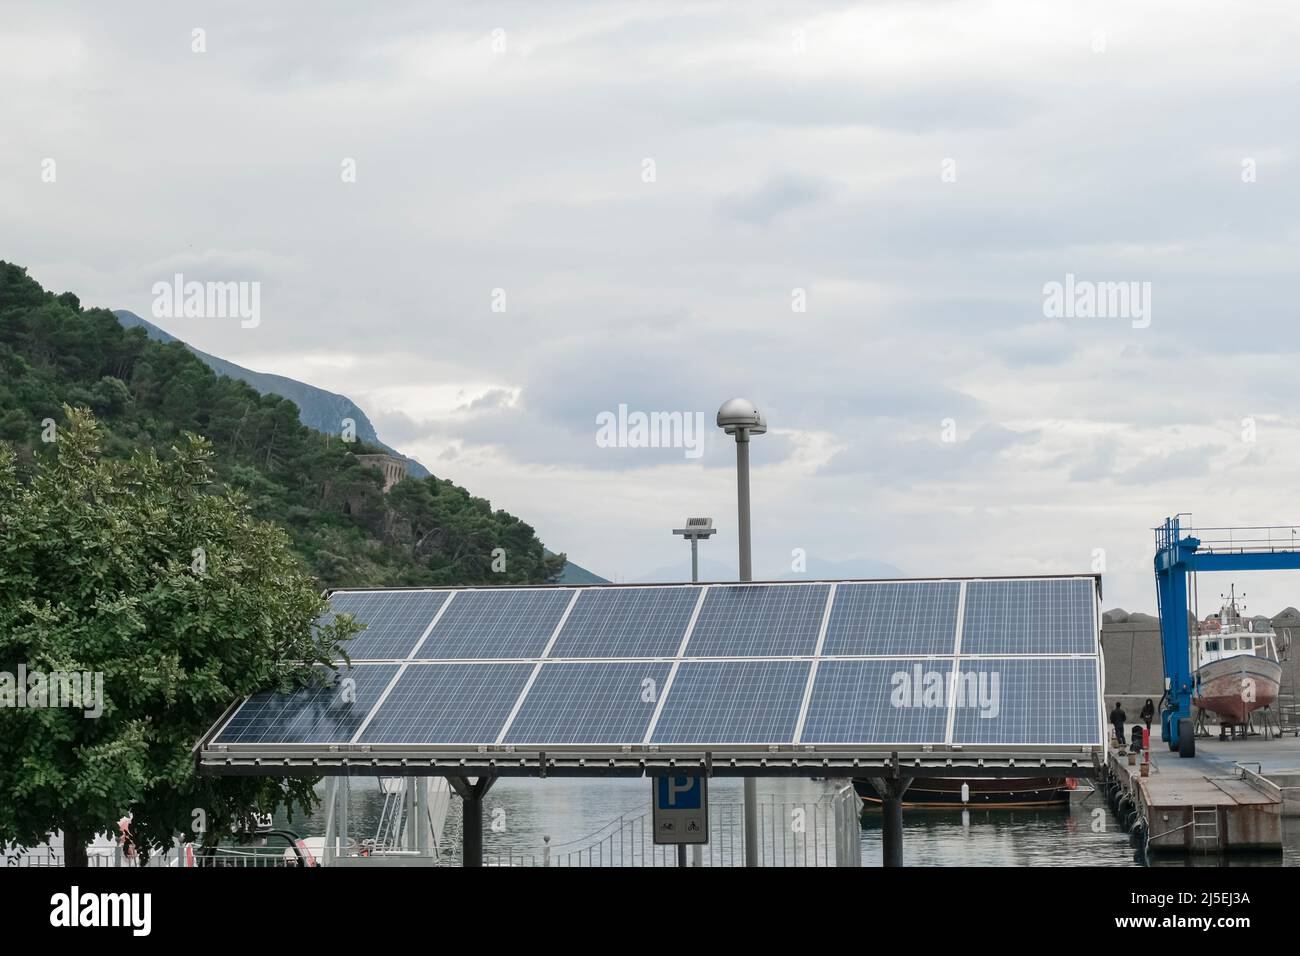 Photovoltaic energy panels installed on parking area,green renewable technology Stock Photo